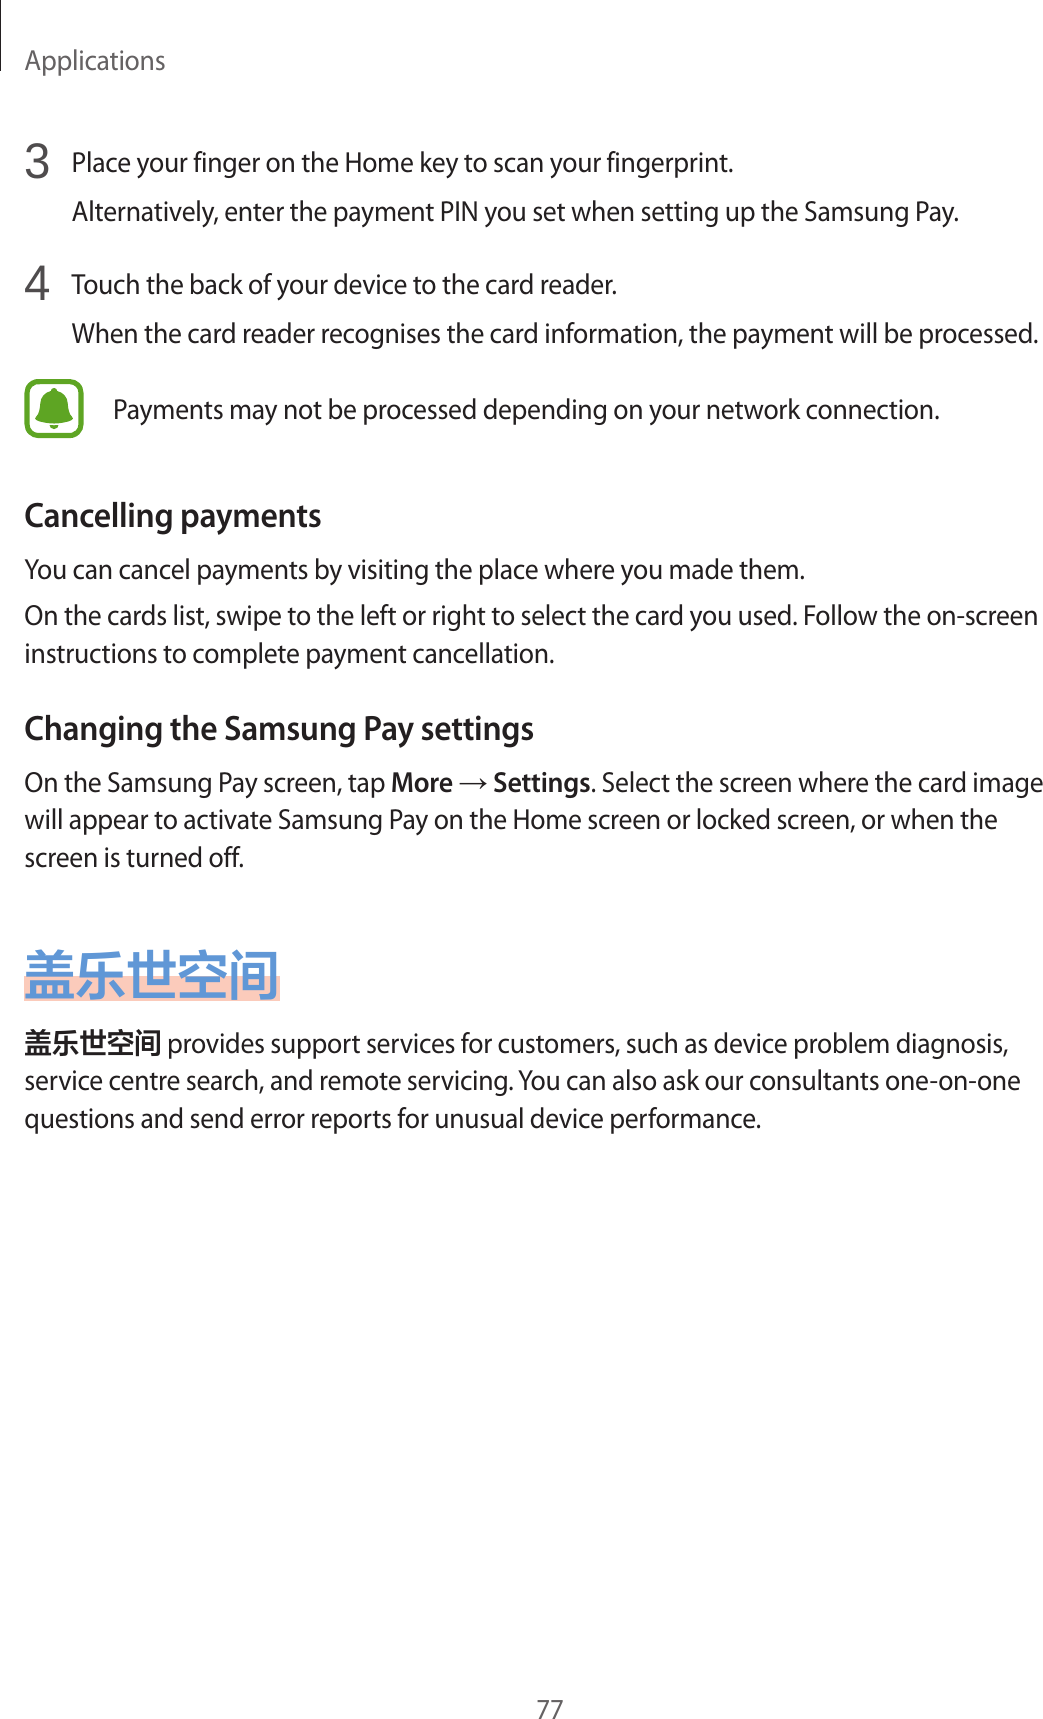 Applications773  Place your finger on the Home key to scan your fingerprint.Alternatively, enter the payment PIN you set when setting up the Samsung Pay.4  Touch the back of your device to the card reader.When the card reader recognises the card information, the payment will be processed.Payments may not be processed depending on your network connection.Cancelling paymentsYou can cancel payments by visiting the place where you made them.On the cards list, swipe to the left or right to select the card you used. Follow the on-screen instructions to complete payment cancellation.Changing the Samsung Pay settingsOn the Samsung Pay screen, tap More → Settings. Select the screen where the card image will appear to activate Samsung Pay on the Home screen or locked screen, or when the screen is turned off.盖乐世空间盖乐世空间 provides support services for customers, such as device problem diagnosis, service centre search, and remote servicing. You can also ask our consultants one-on-one questions and send error reports for unusual device performance.